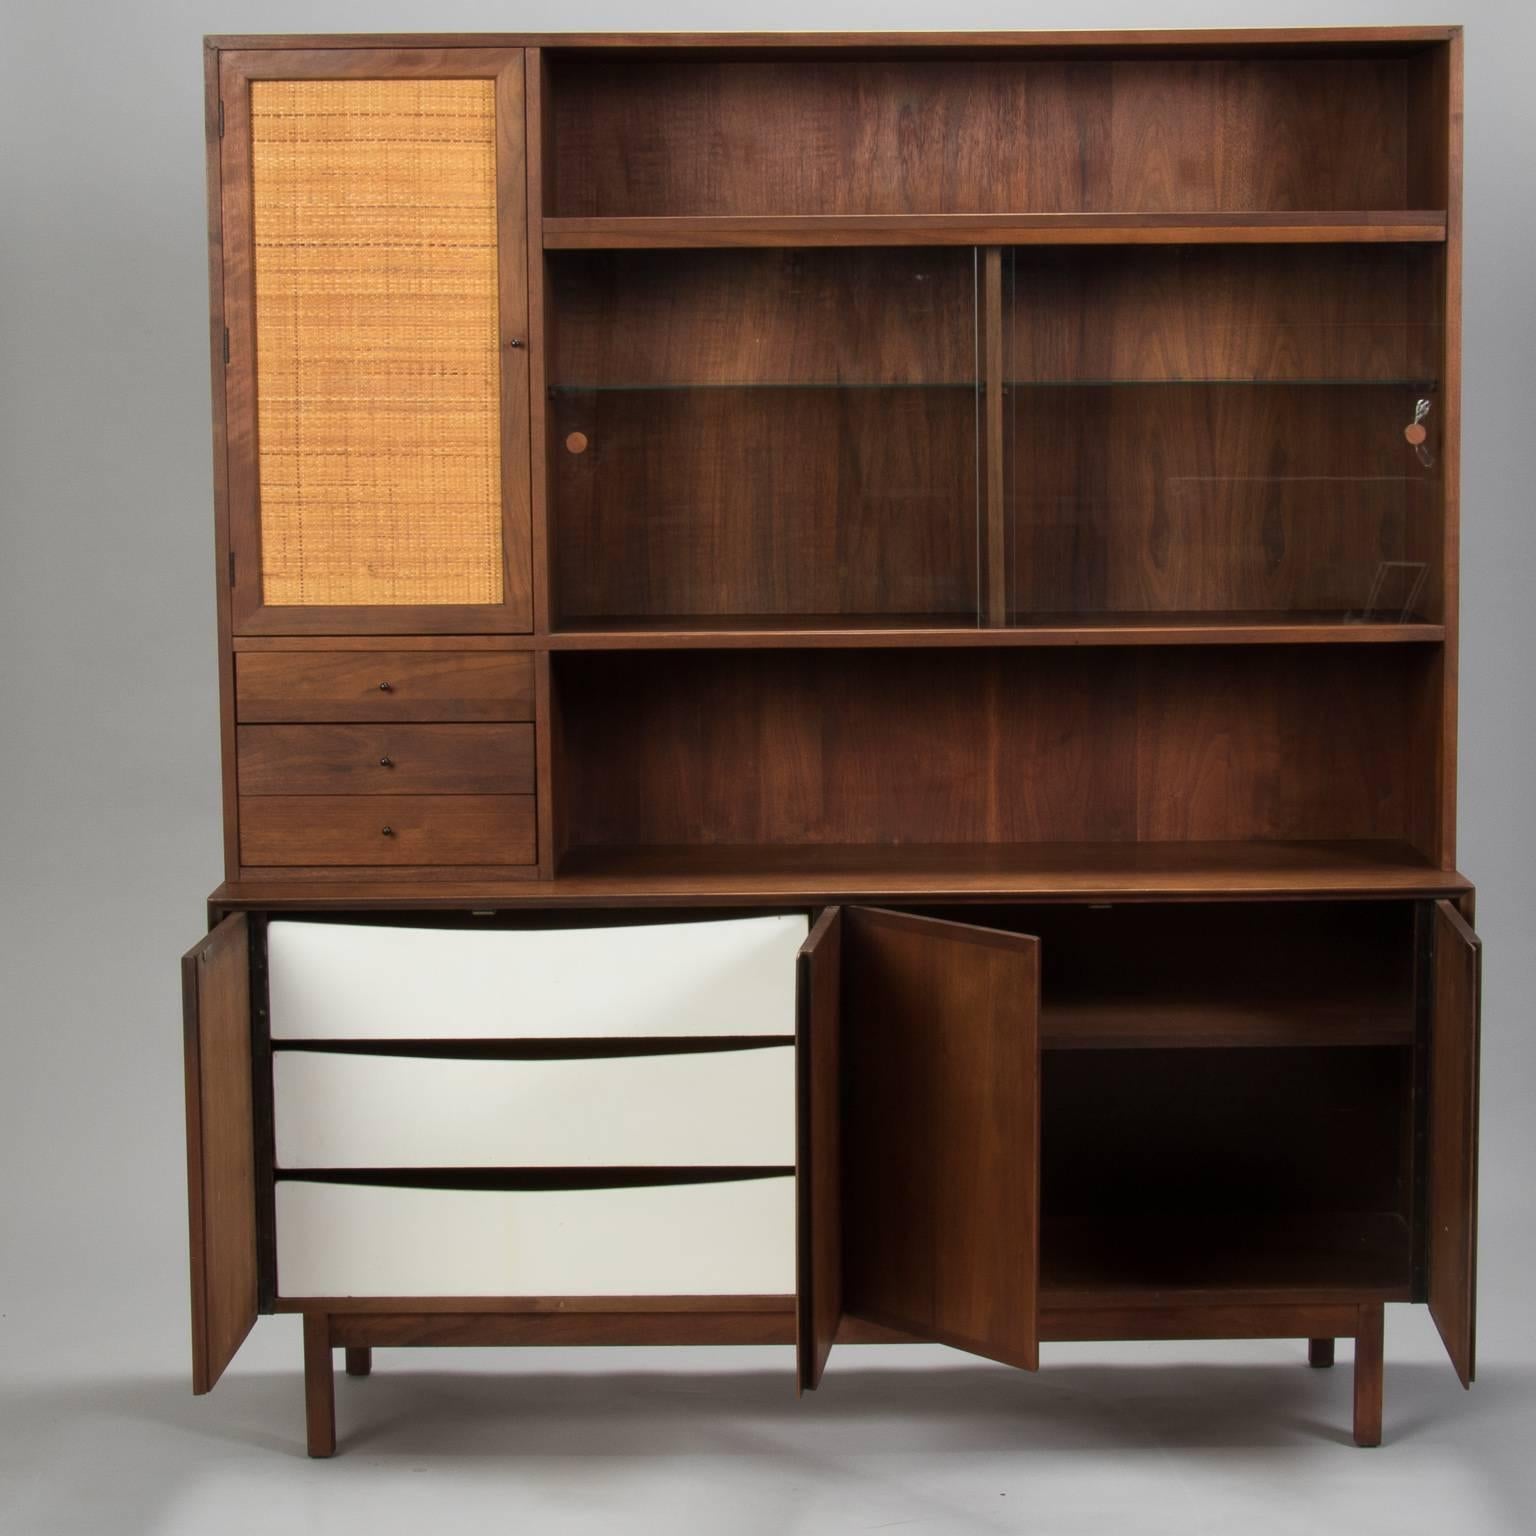 Walnut serving, buffet or sideboard cabinet from Dillingham's Esprit collection designed by Martin Borenstein. Often attributed to Milo Baughman, the Esprit collection shares a lot of the iconic early Baughman style elements, circa 1960s.